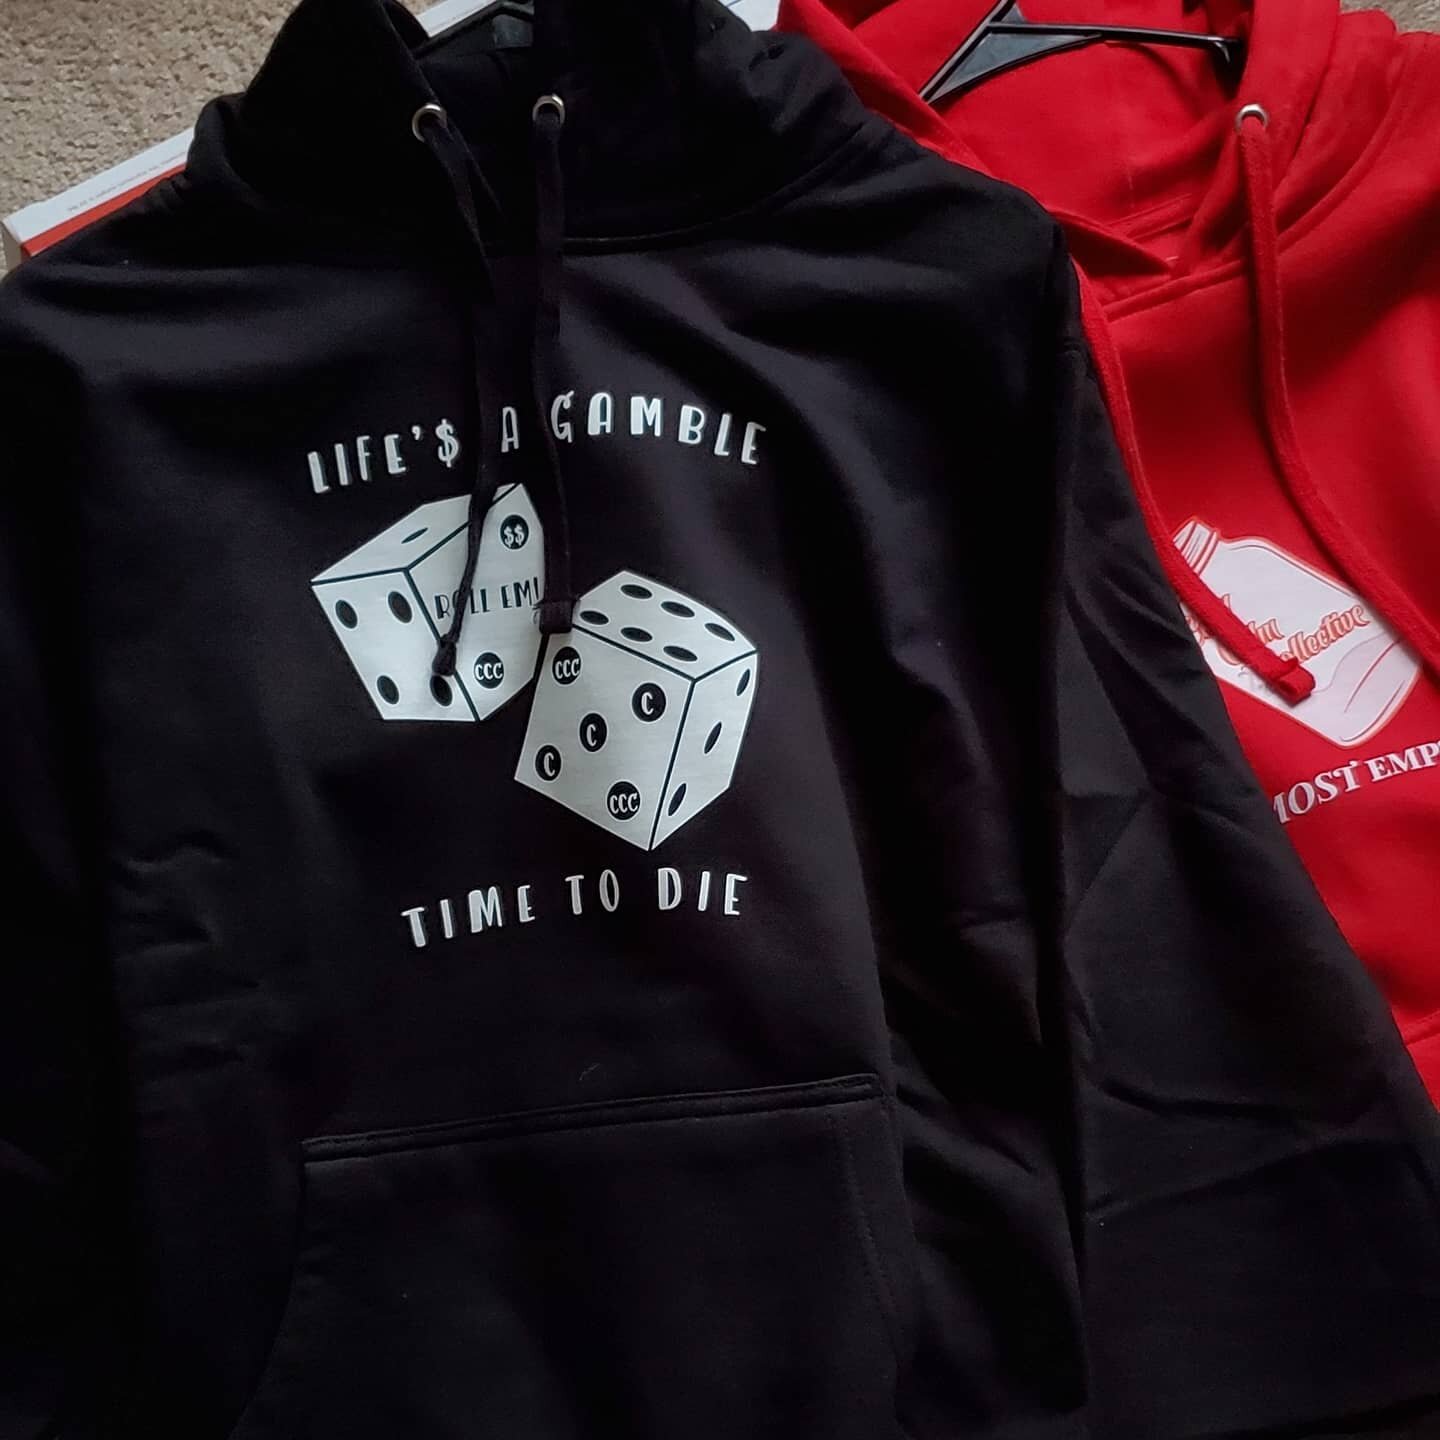 NEW HOODIE ALERT 🚨 The Time to Die hoodie is NOW available on the site
.
.
.
.
.
.

#streetwear #newproducts #clothing #clothingbrand #fxbg #global #like4like #instagood #virginia #shopsmall #promo #usa #logo #ccc #hoodieseason #nyc #dice #blackandw